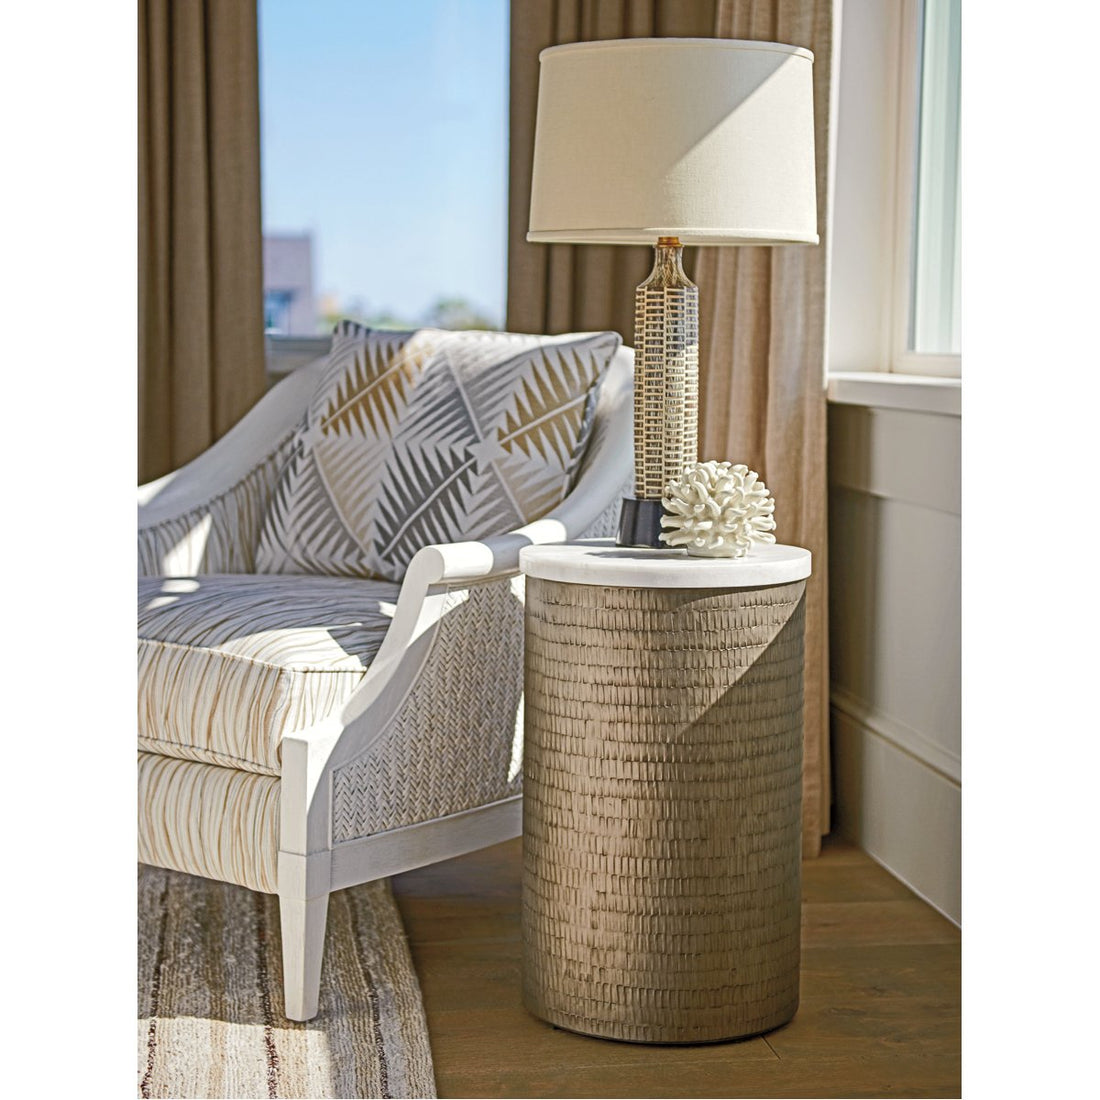 Tommy Bahama Ocean Breeze Turnberry Round Chairside Table